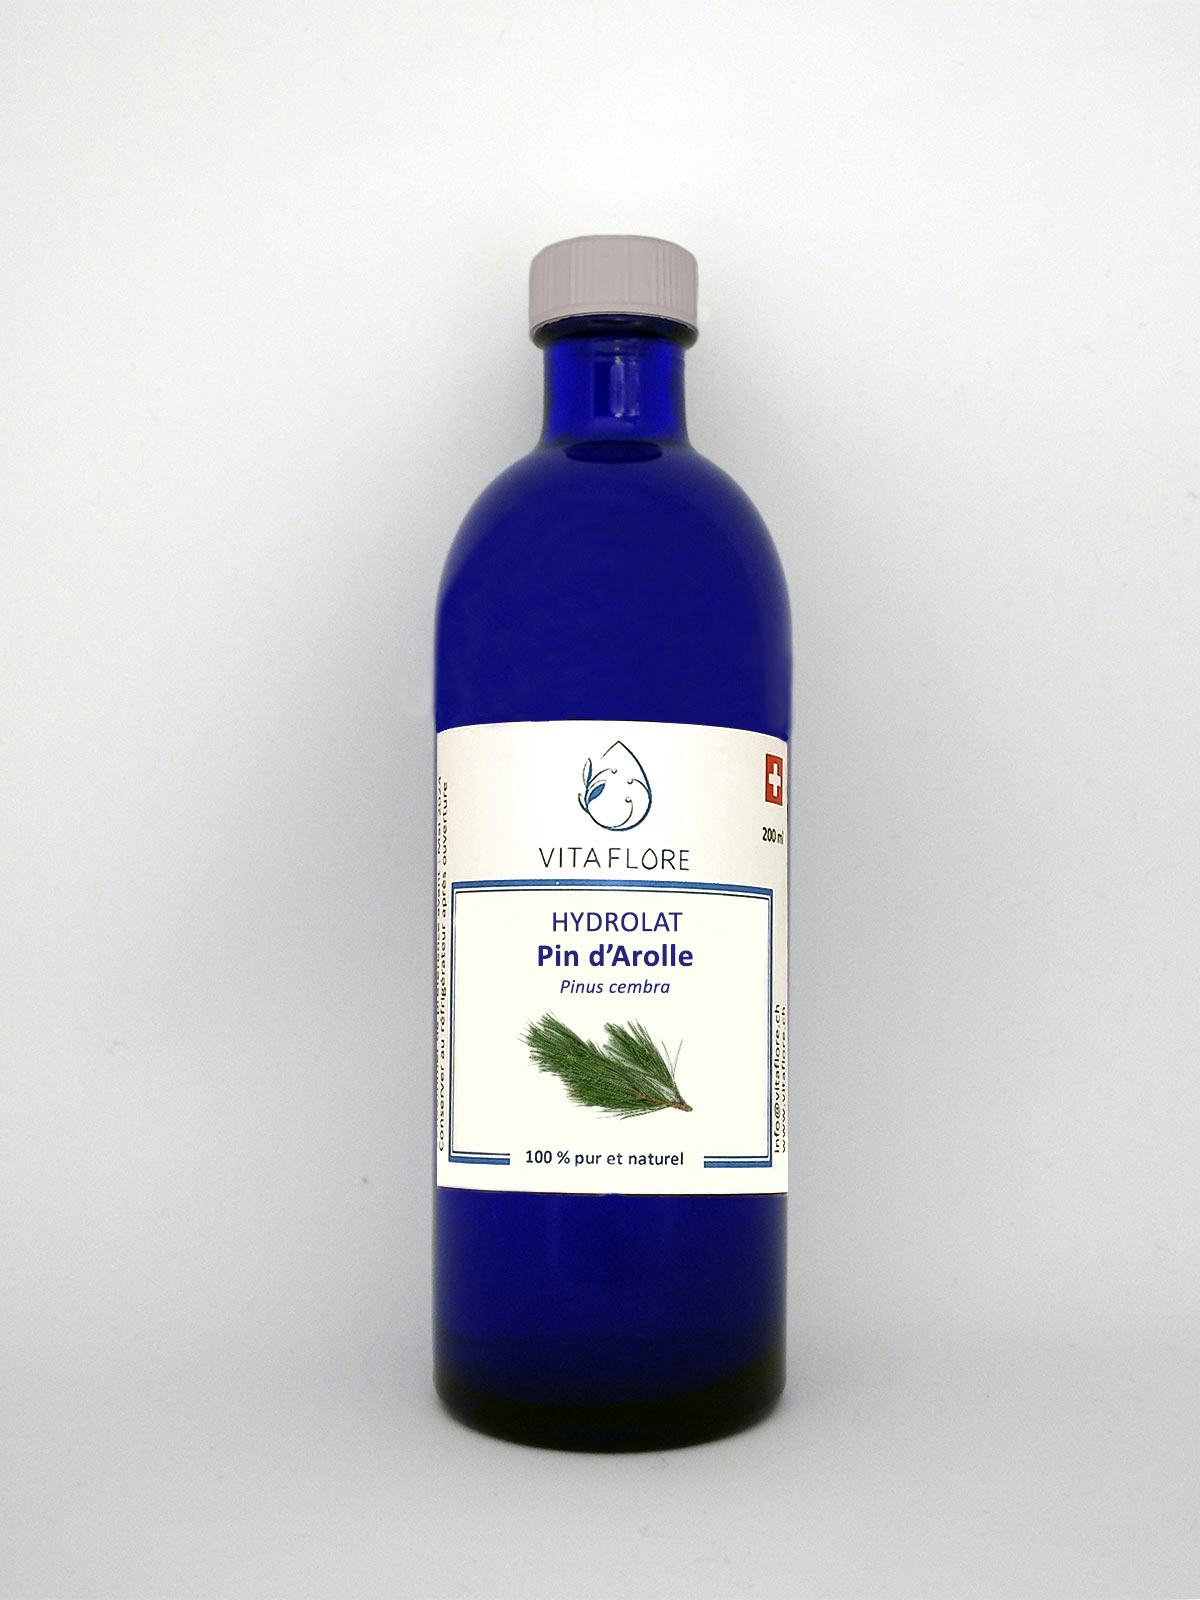 Hydrolat Pin d’Arolle, artisanal product for direct sale in Switzerland